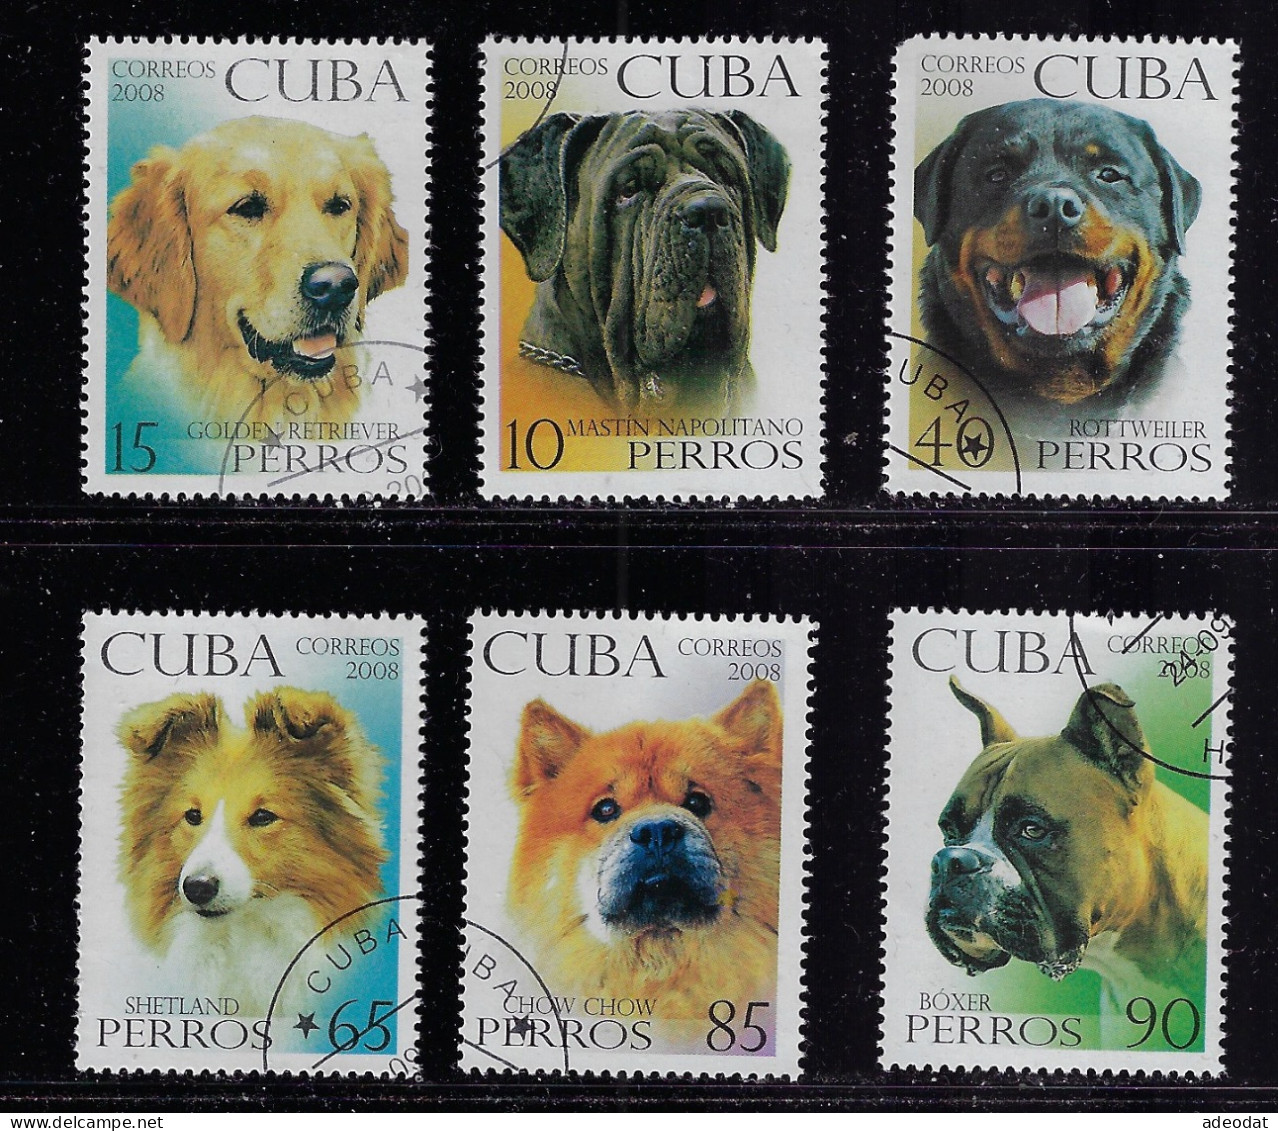 CUBA 2008 STAMPWORLD 5137-5142 CANCELLED - Used Stamps